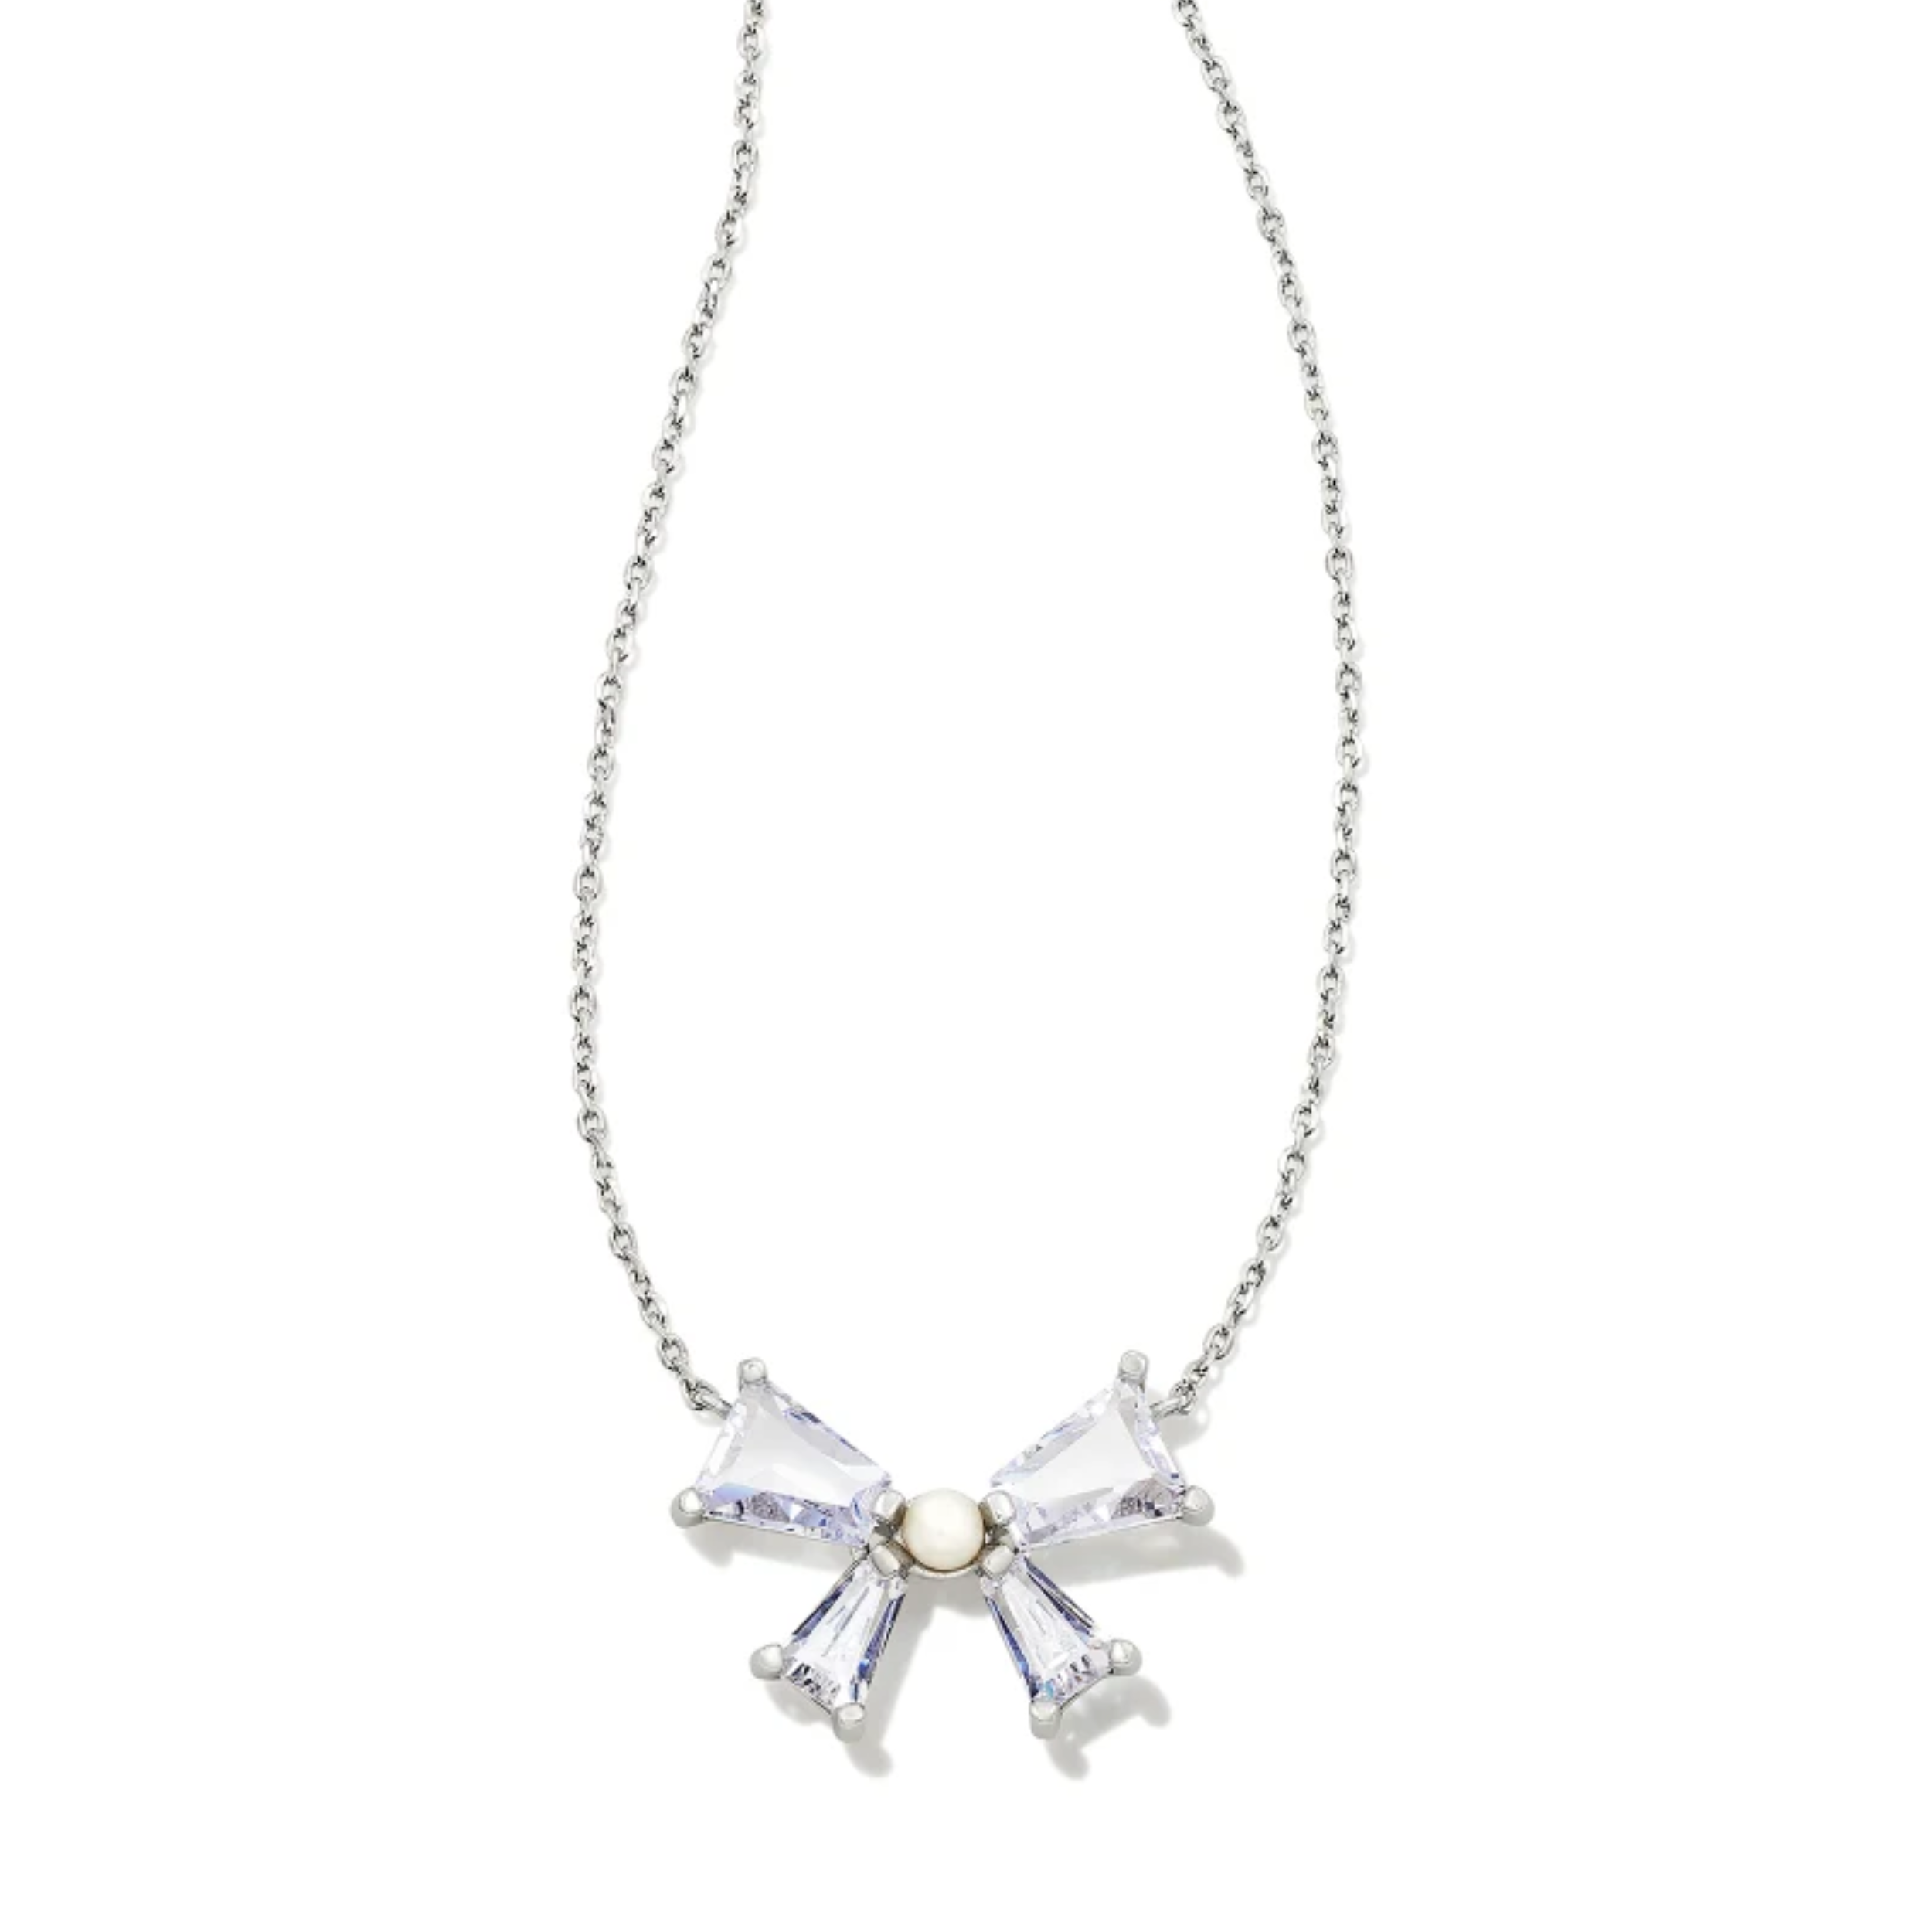 This Blair Silver Bow Pendent Necklace in White by Kendra Scott is pictured on a white background.